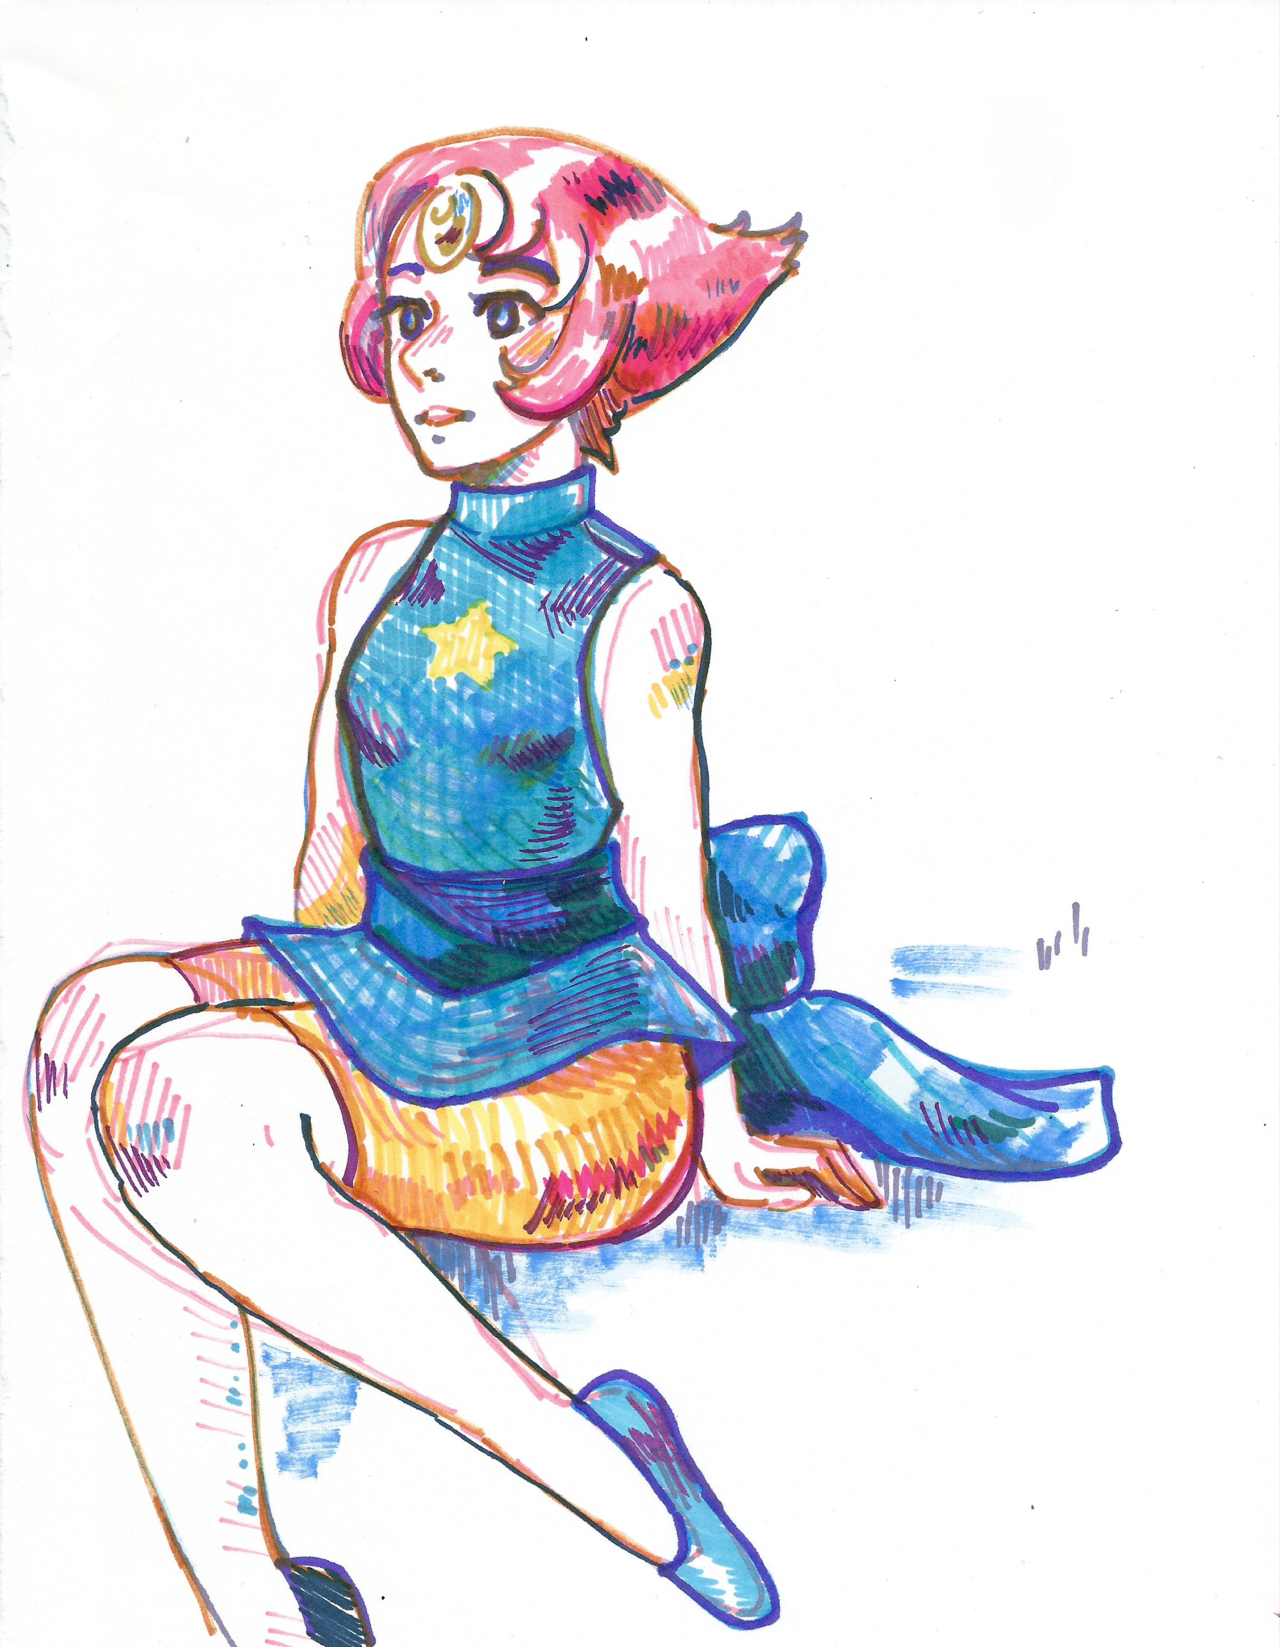 Testing some stuff out with markers and ended up drawing some gems